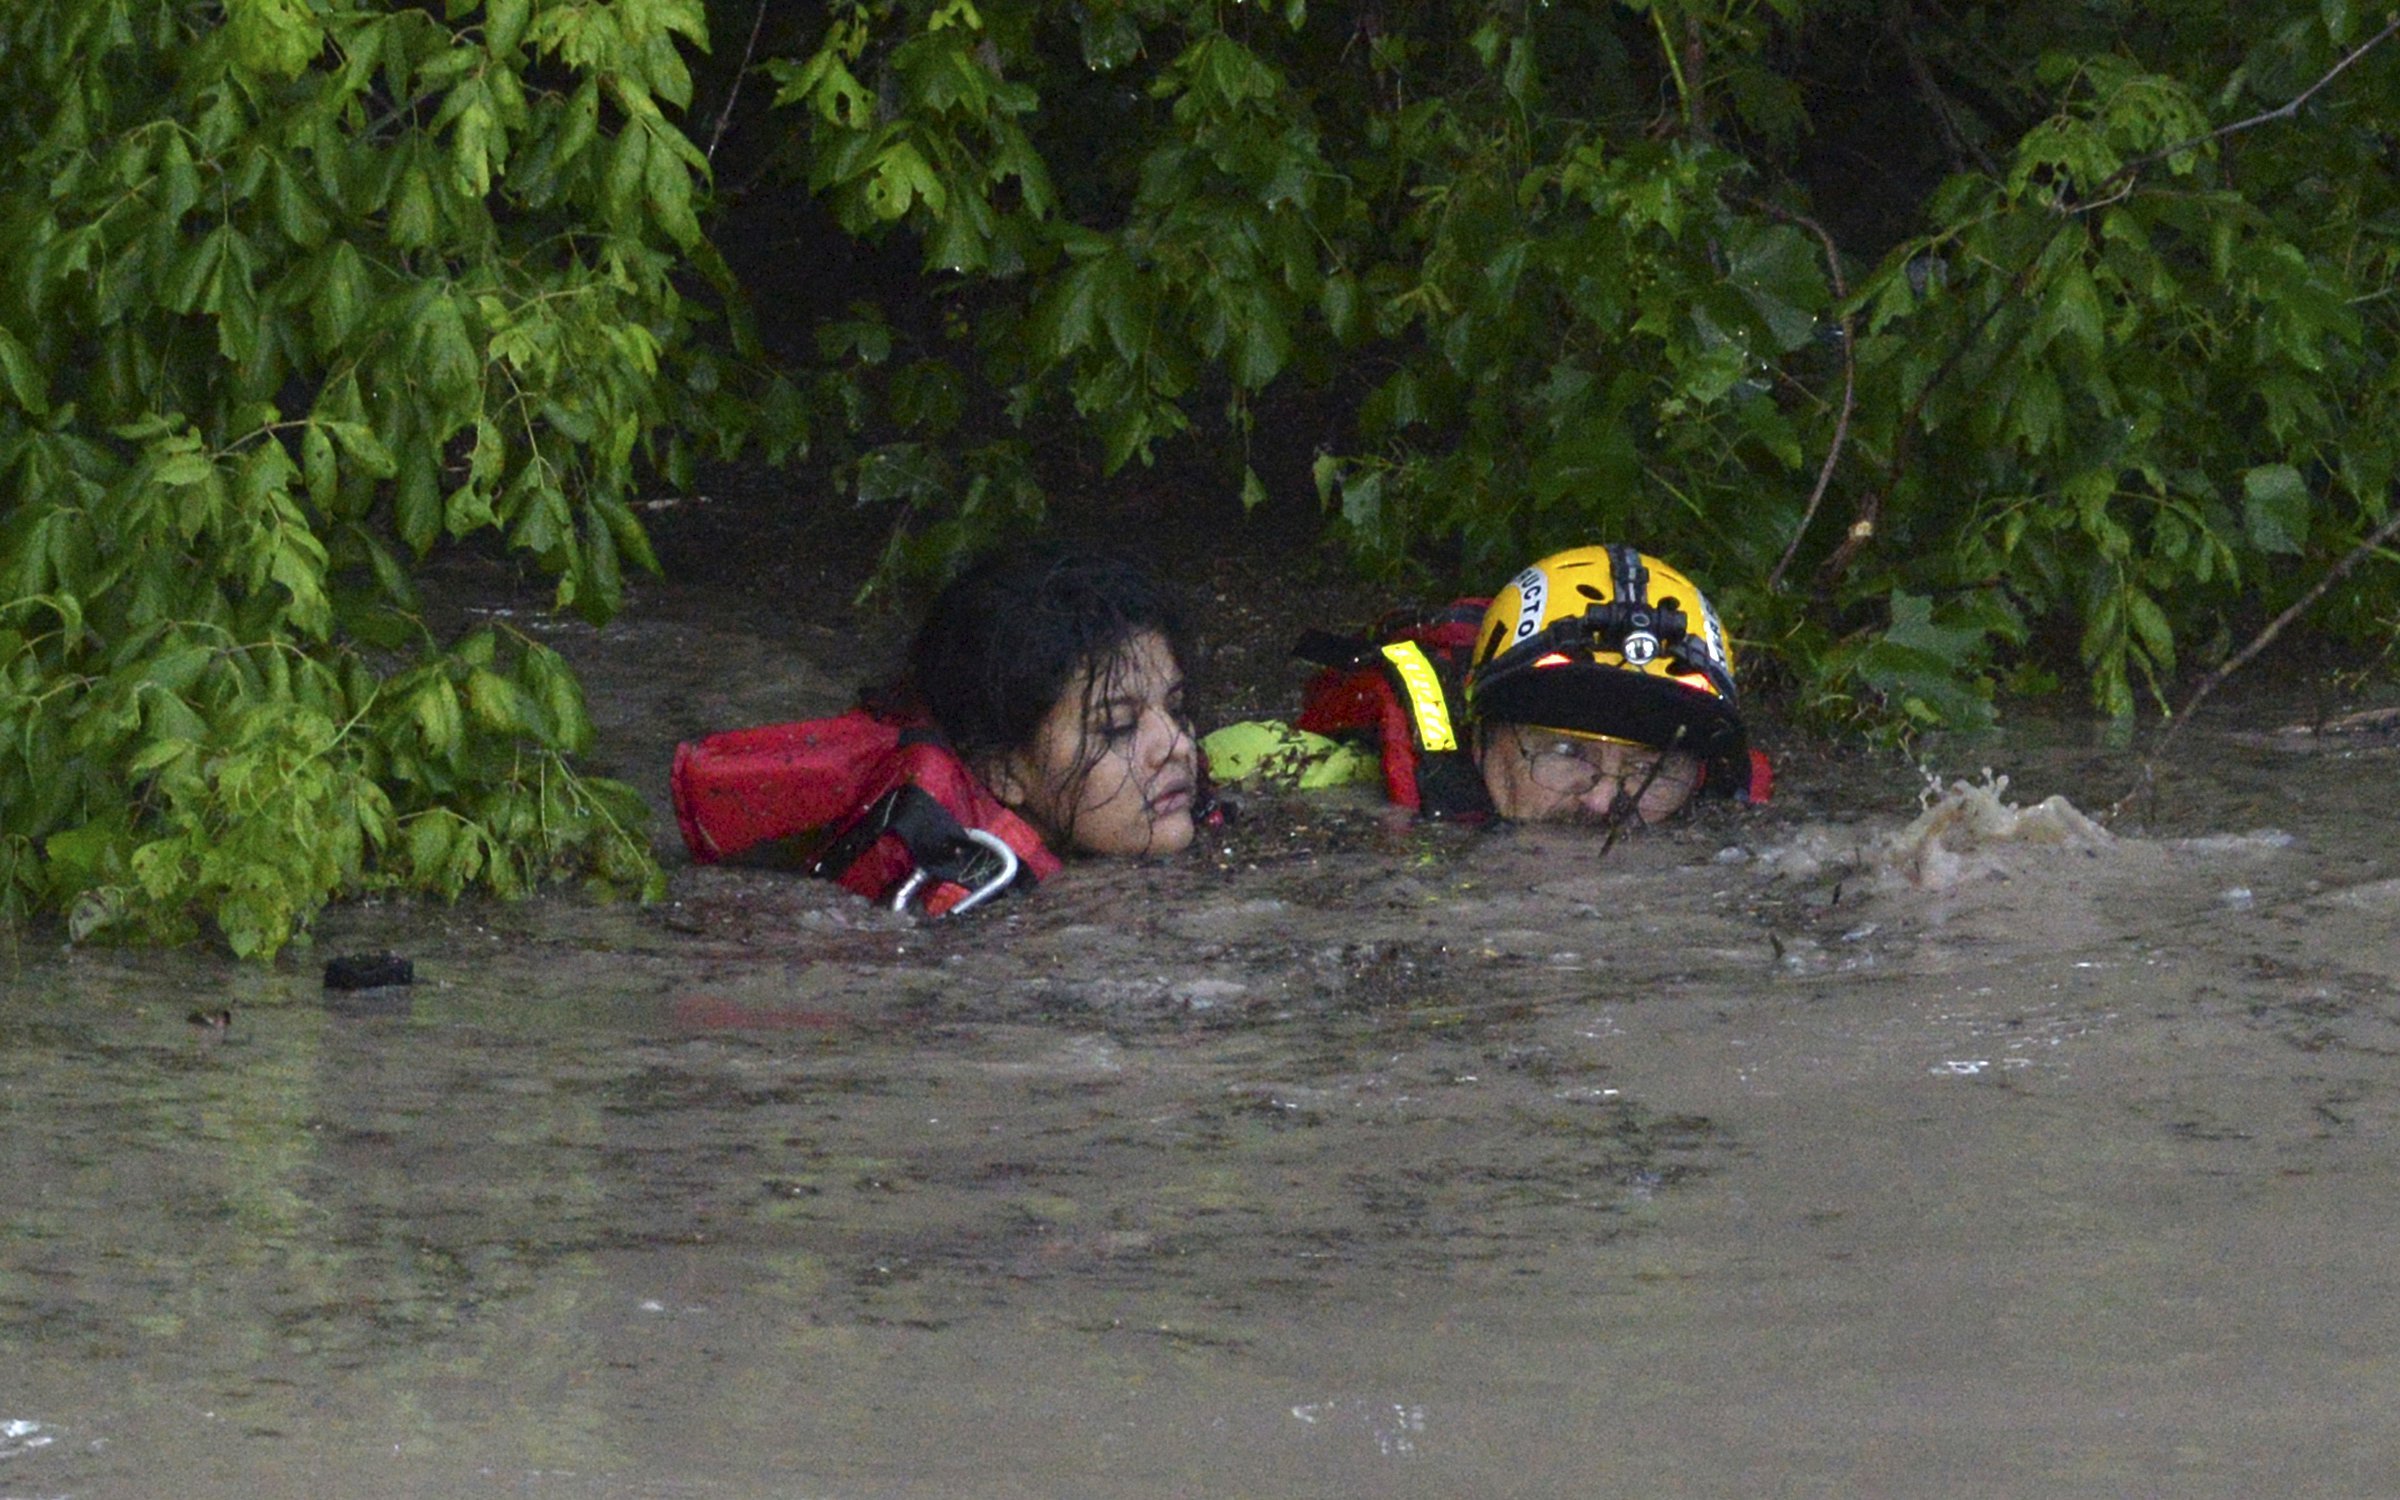 San Marcos Firefighter Jay Horton rescues a woman from the flood waters in San Marcos, Texas on May 24, 2015.